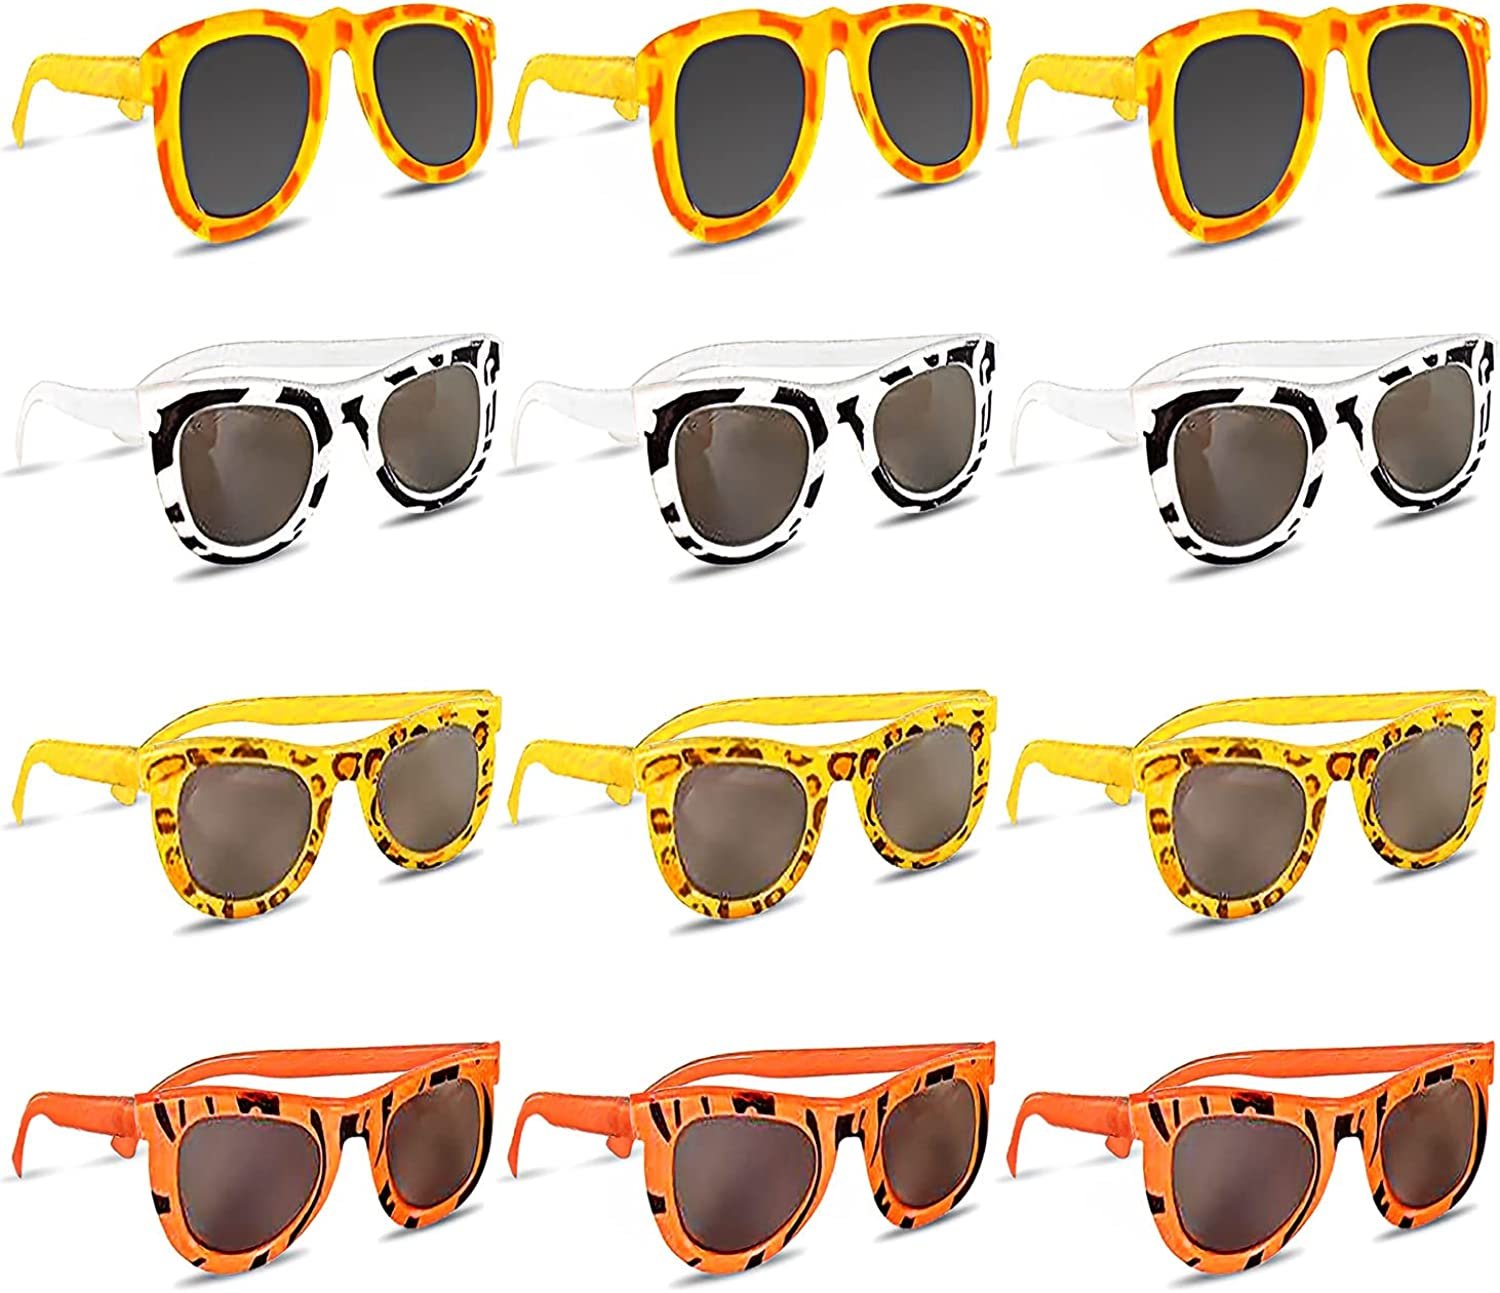 ArtCreativity Safari Sunglasses - Pack of 12 - Youth Size - Assorted Animal Prints - Summer Time Fun, Great Party Favor - Amazing Gift Idea for Boys and Girls